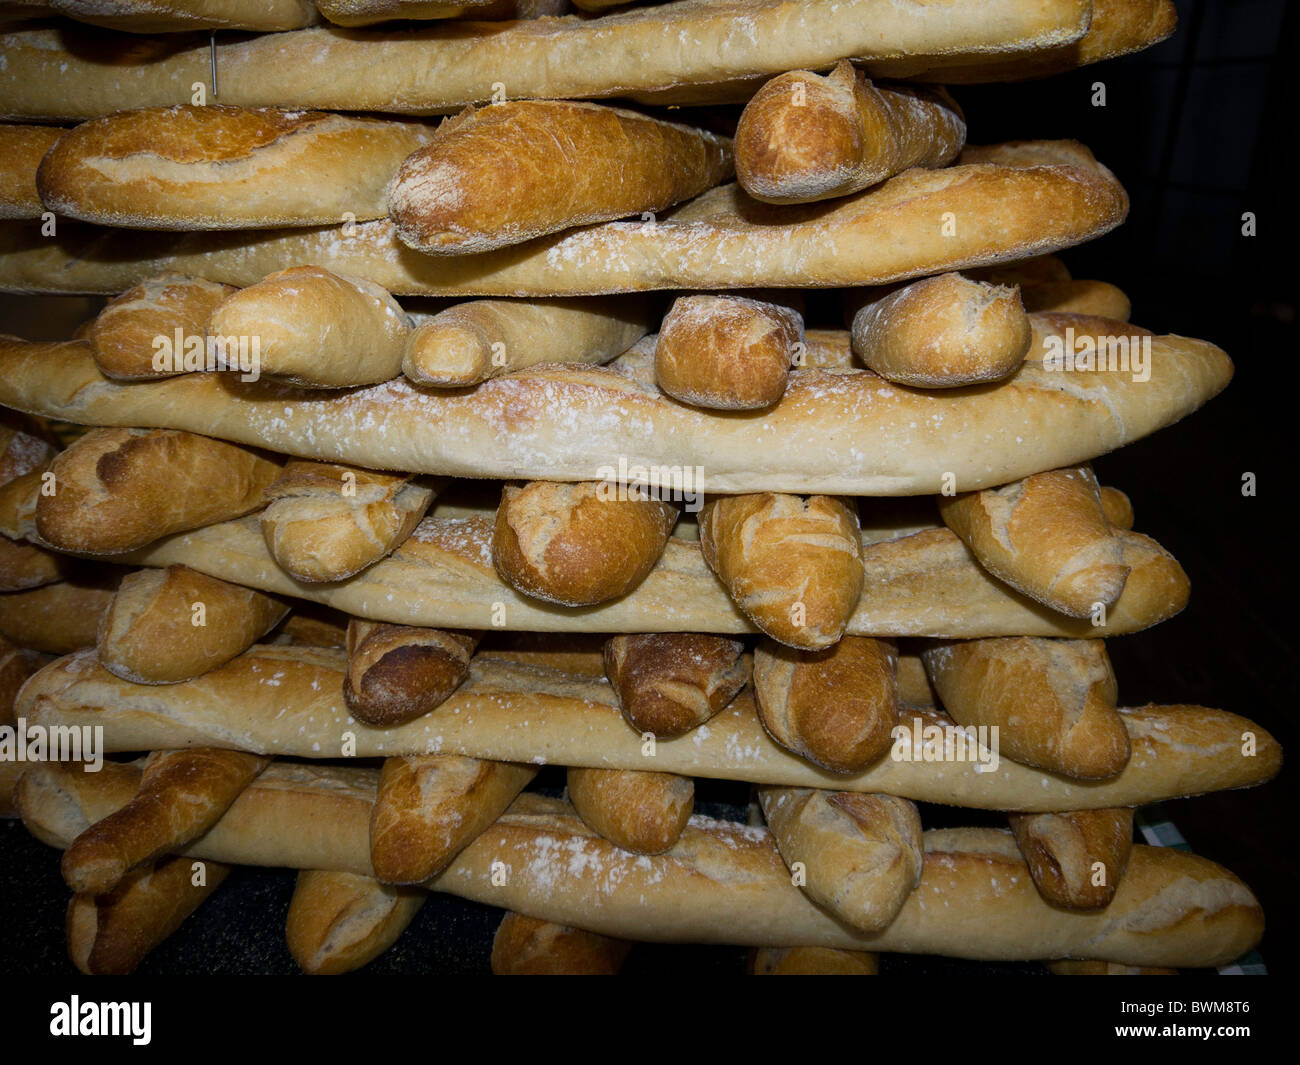 Loaves of bread stacked upon one another Stock Photo